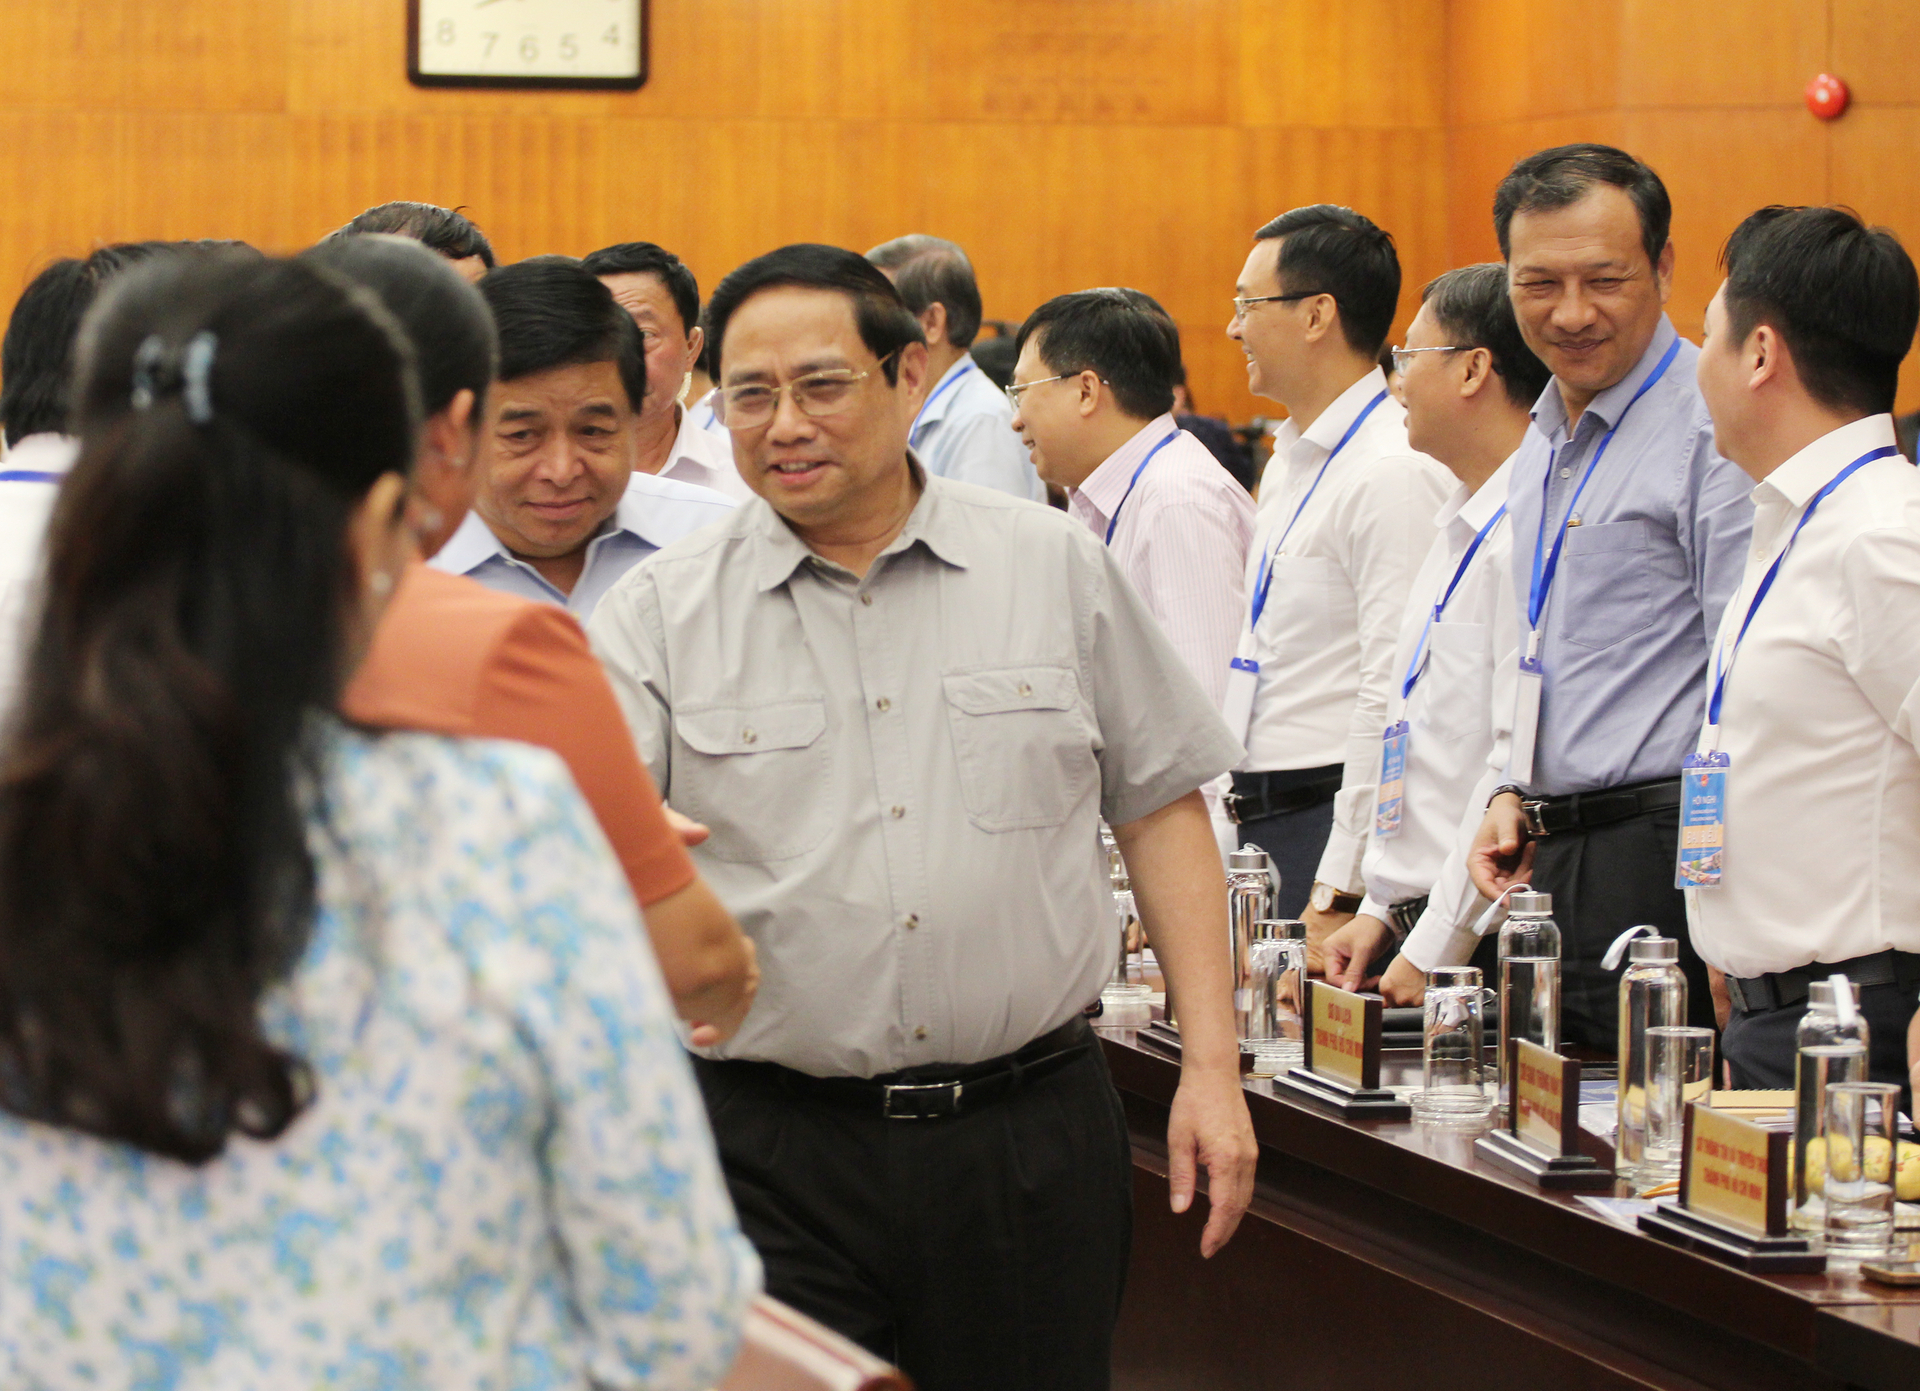 Prime Minister Pham Minh Chinh meeting delegates before the Conference. Photo: T.N.